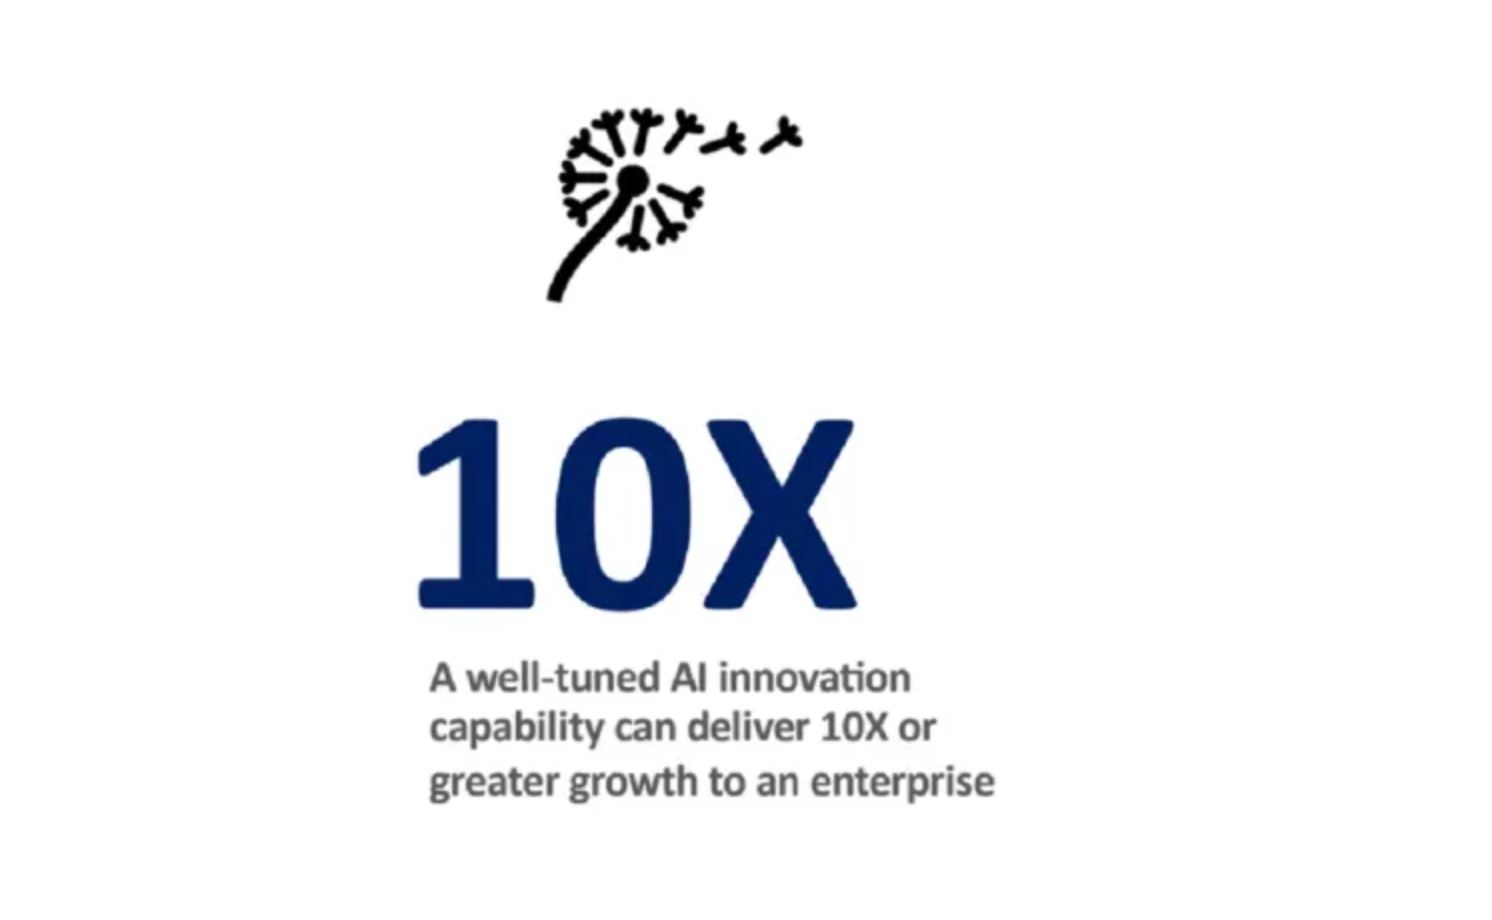 How AI Innovation Can Drive 10X Growth in Enterprises - David Shrier Interview